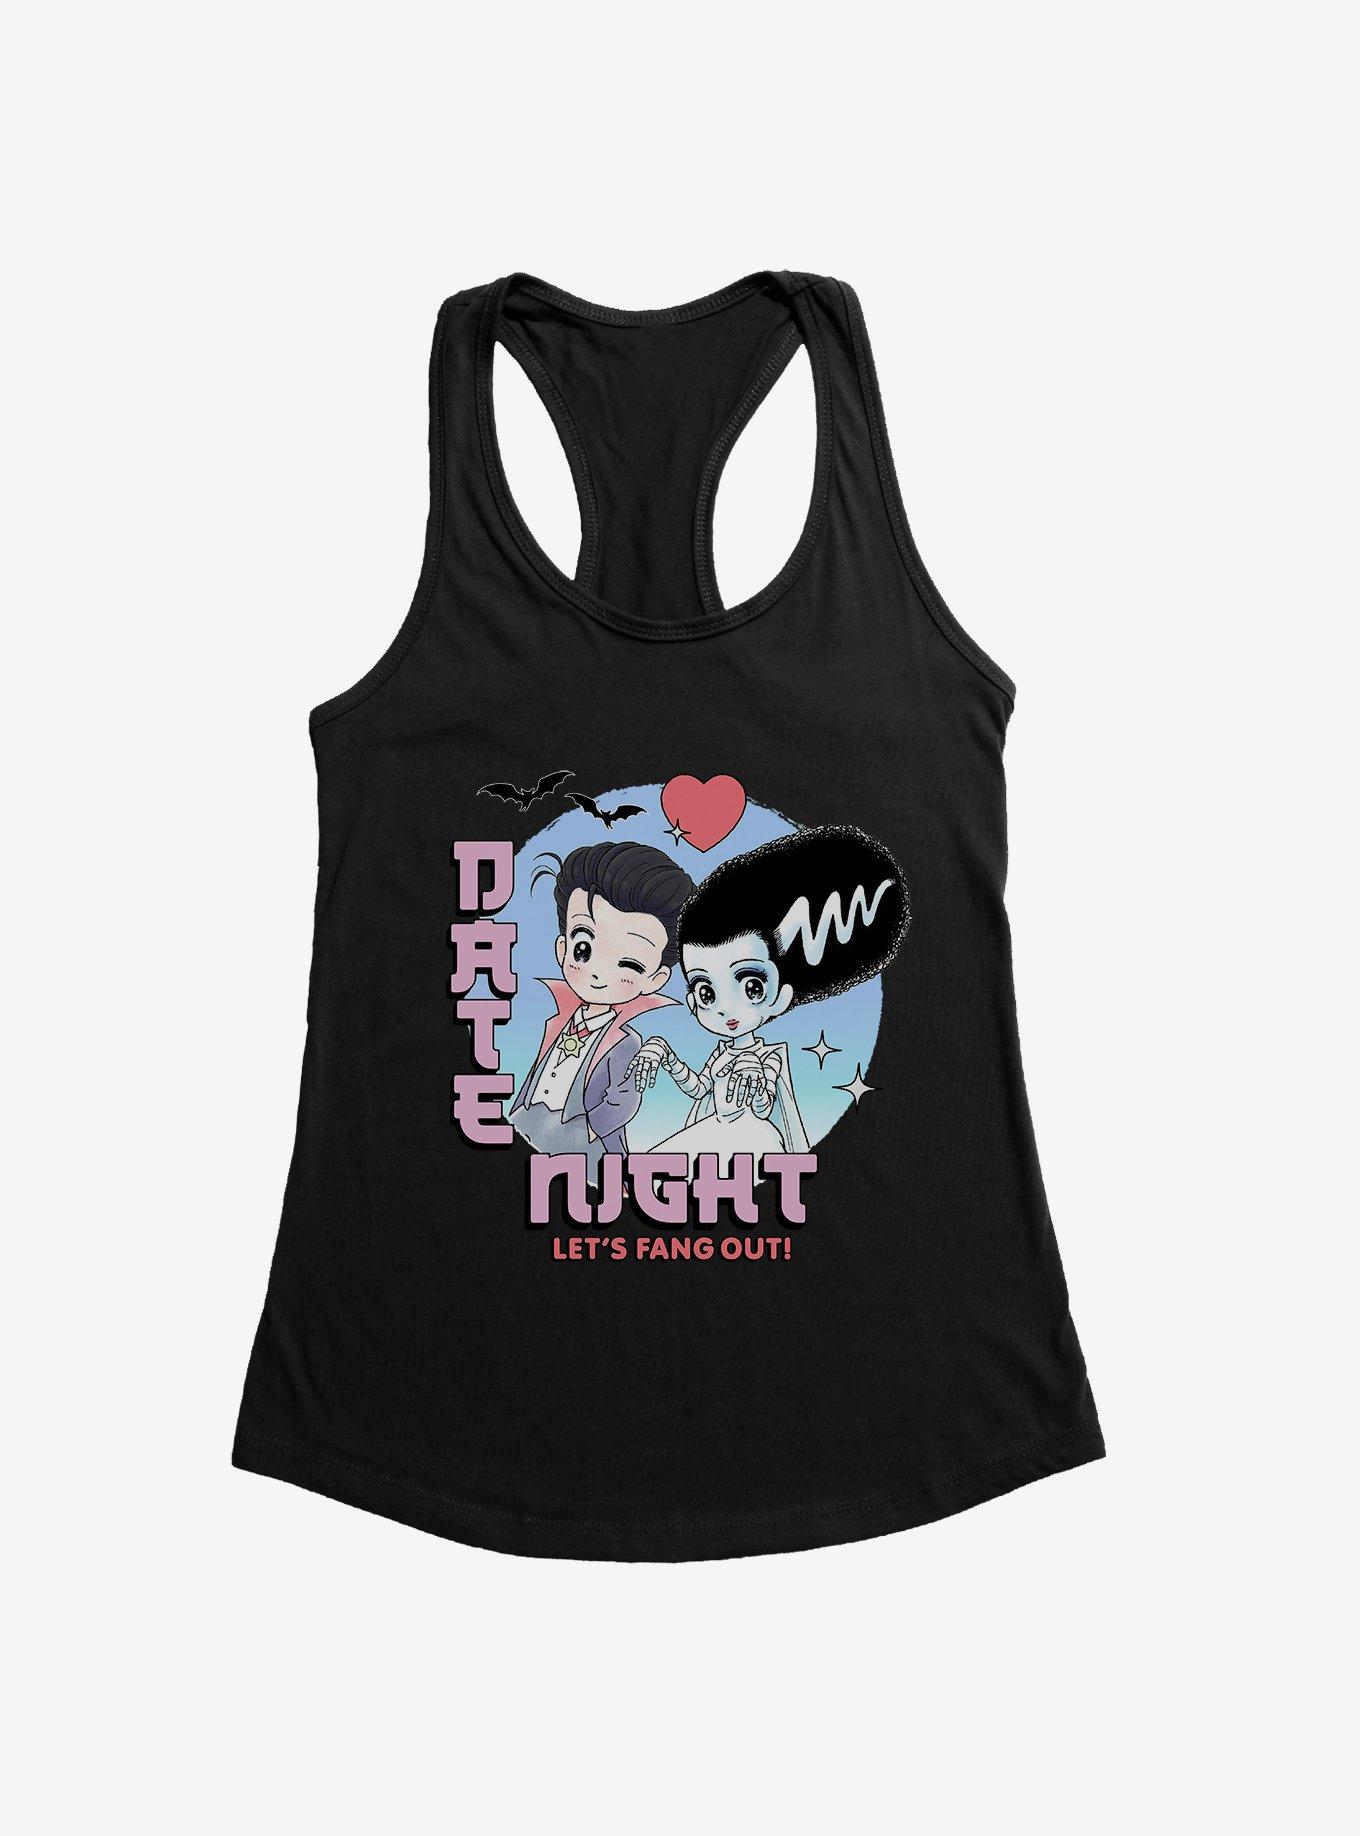 Universal Monsters Date Night Fang Out Girls Tank